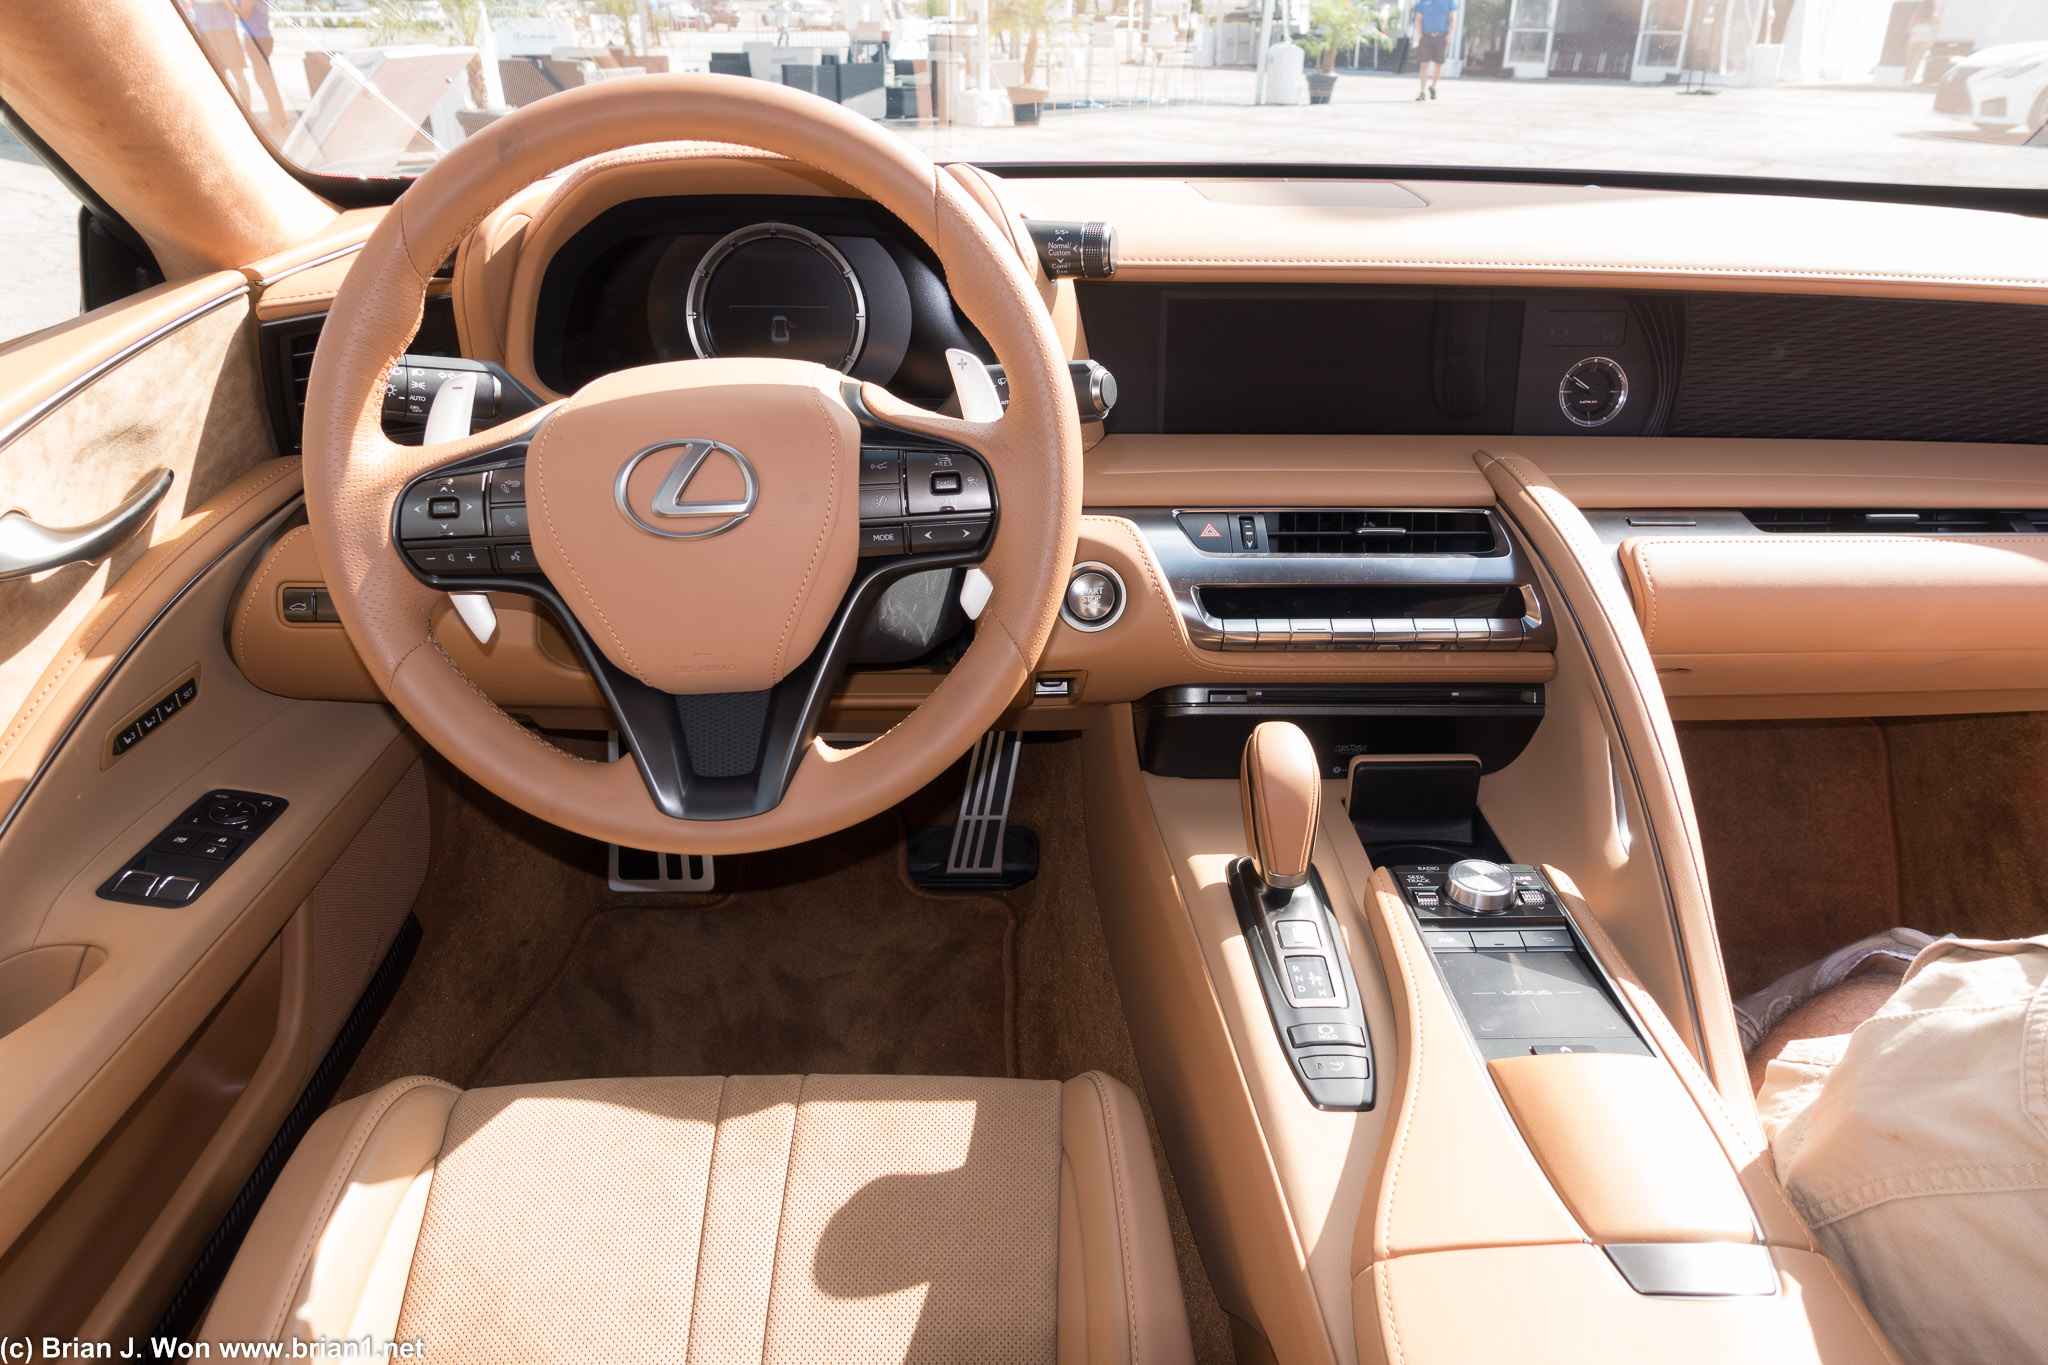 Lexus LC500 dash is clearly very driver-centric.